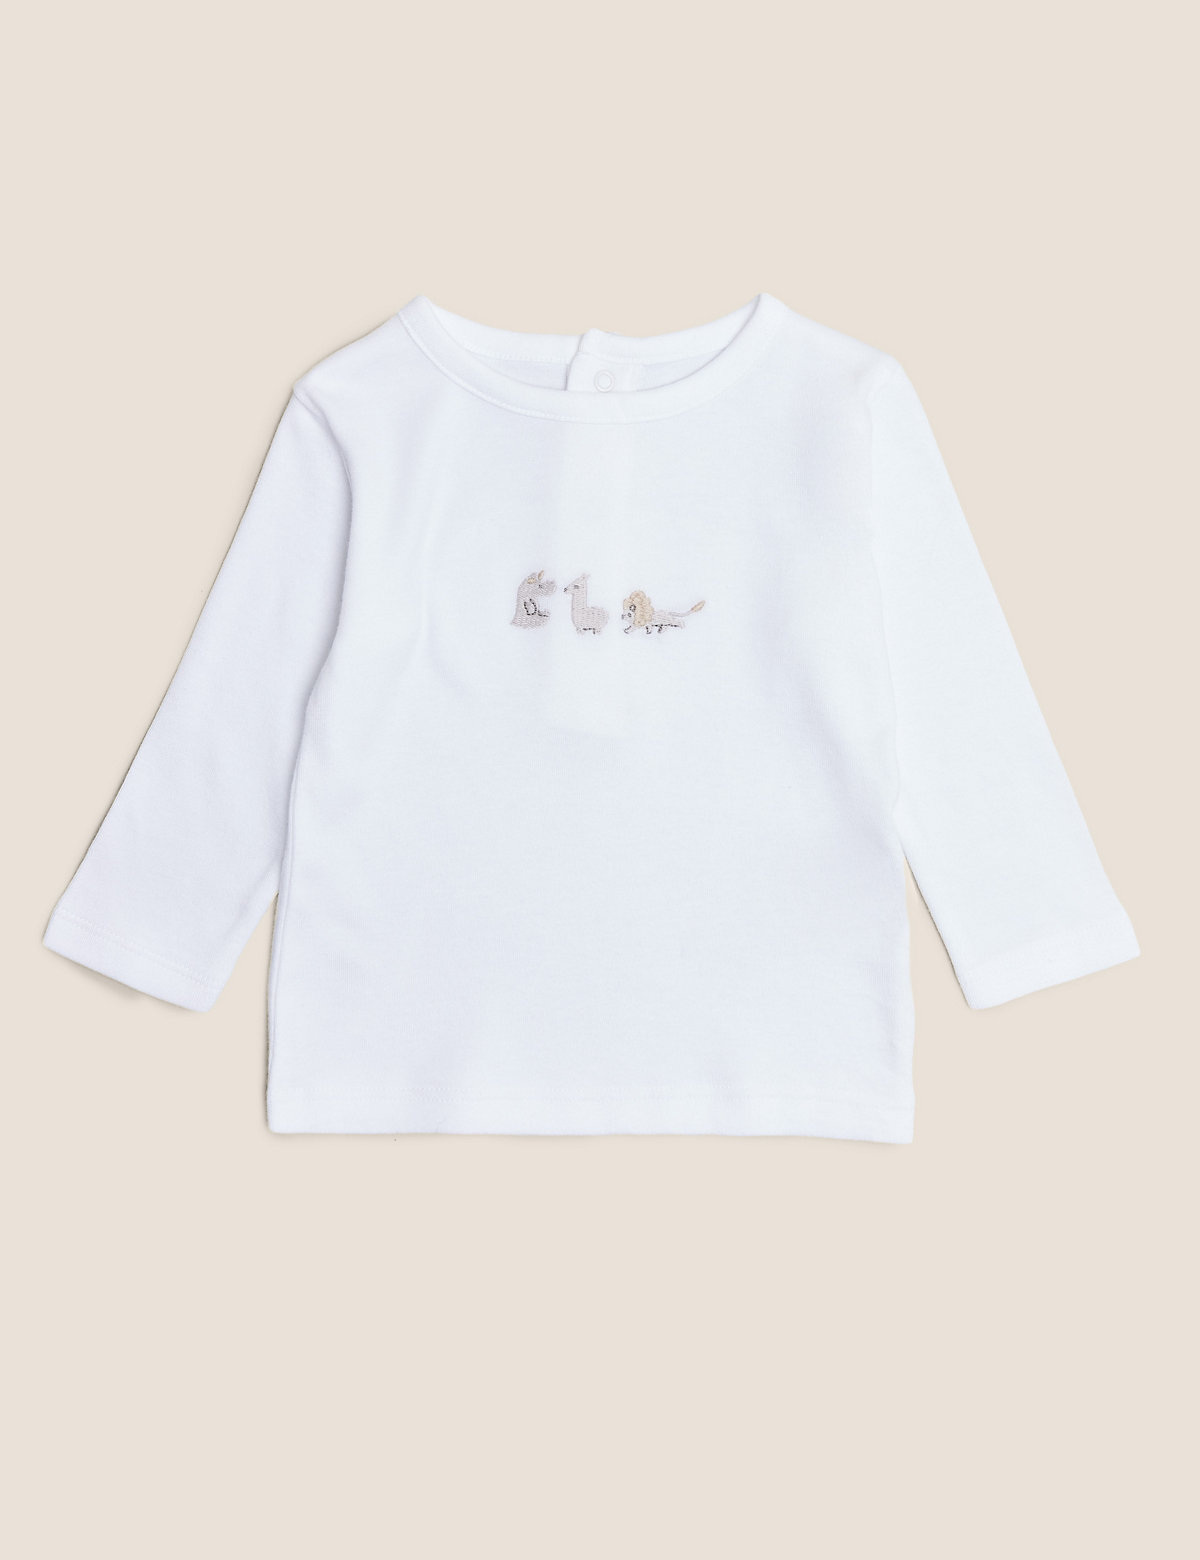 2pc Organic Cotton Embroidered Outfit (7lbs- 12 Mths)